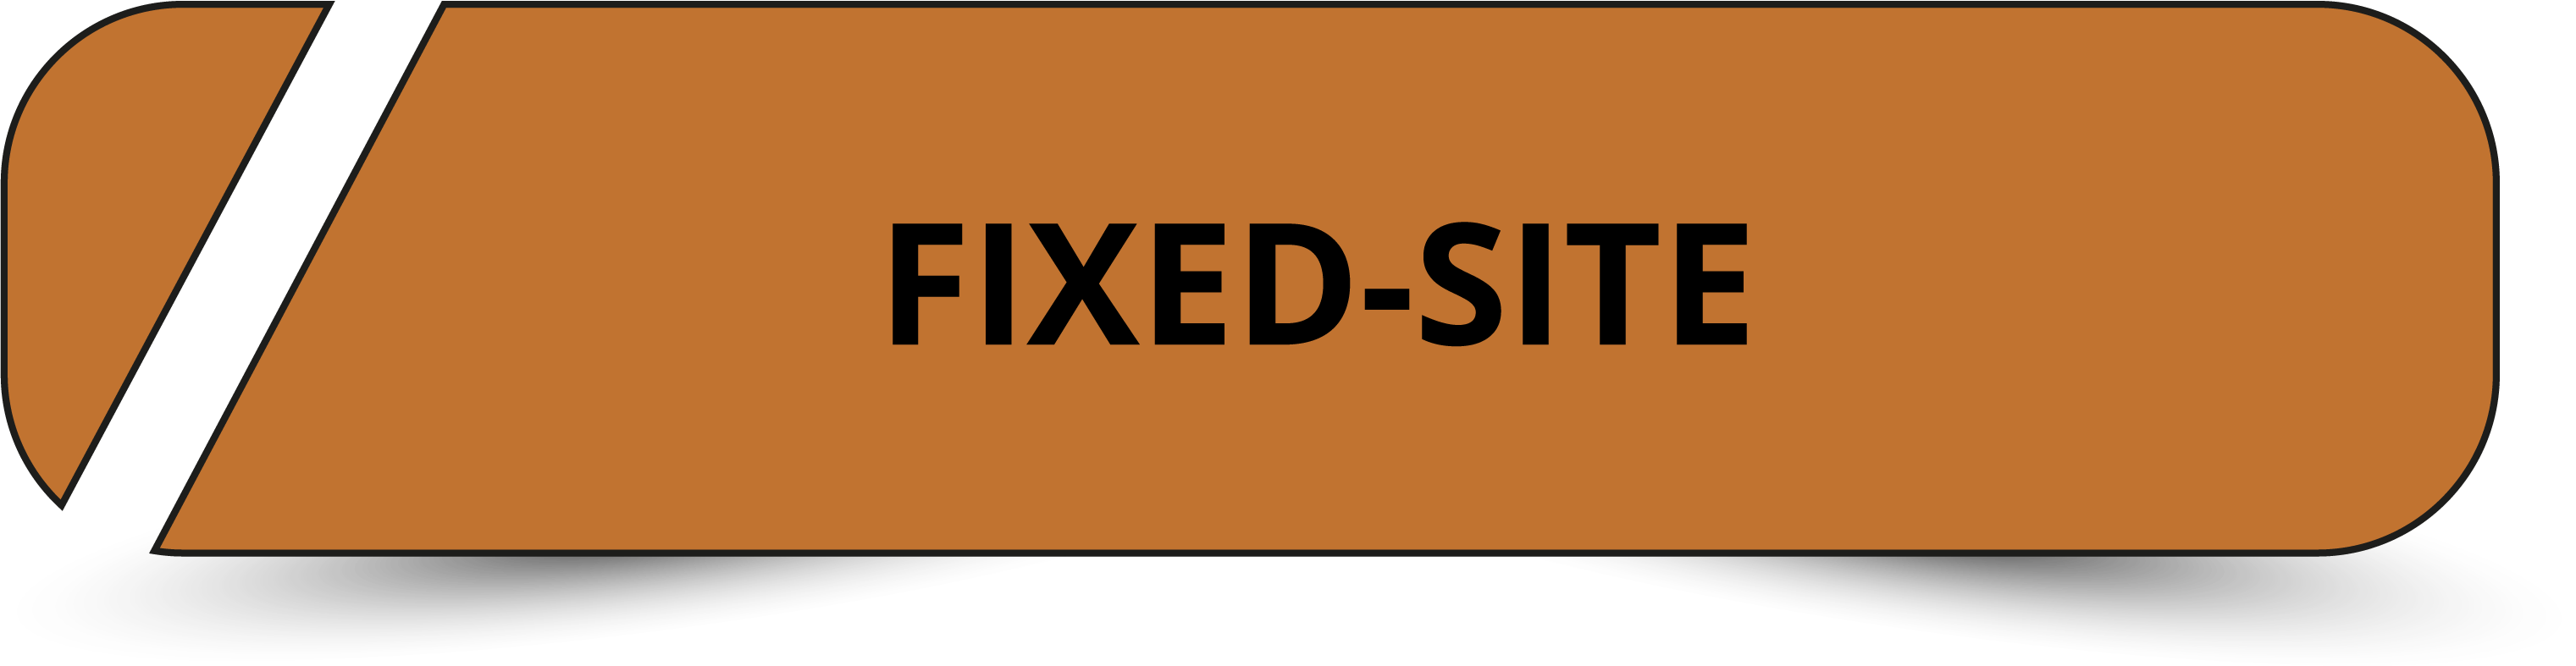 fixed-site